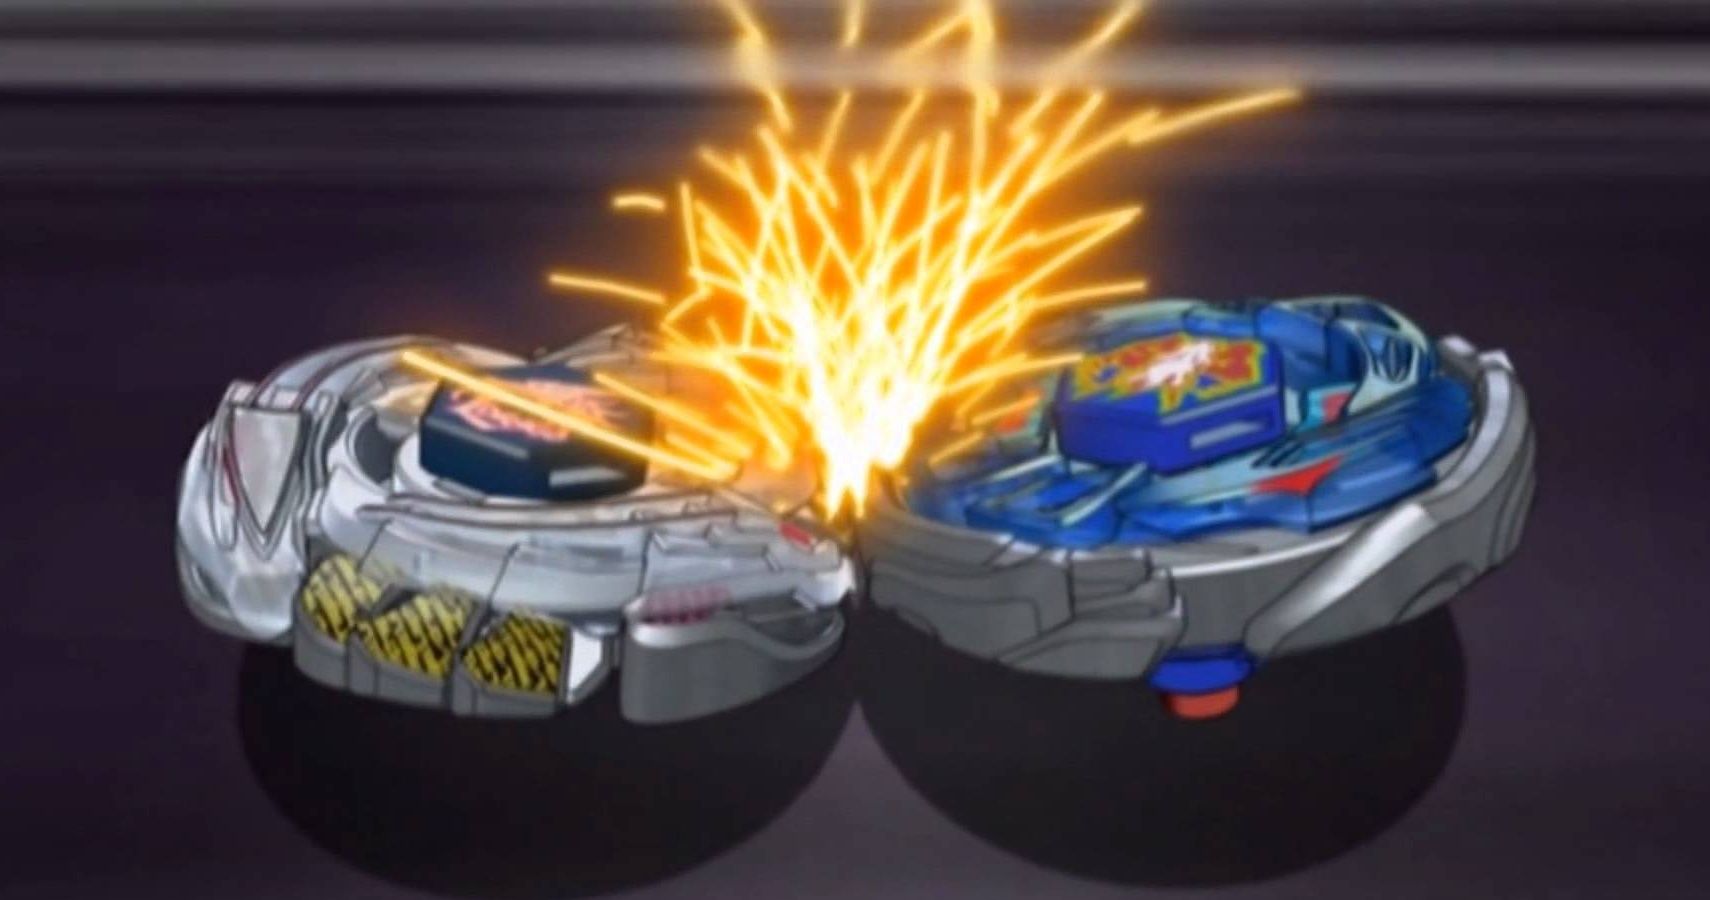 10 Facts Only True Fans Know About Beyblade